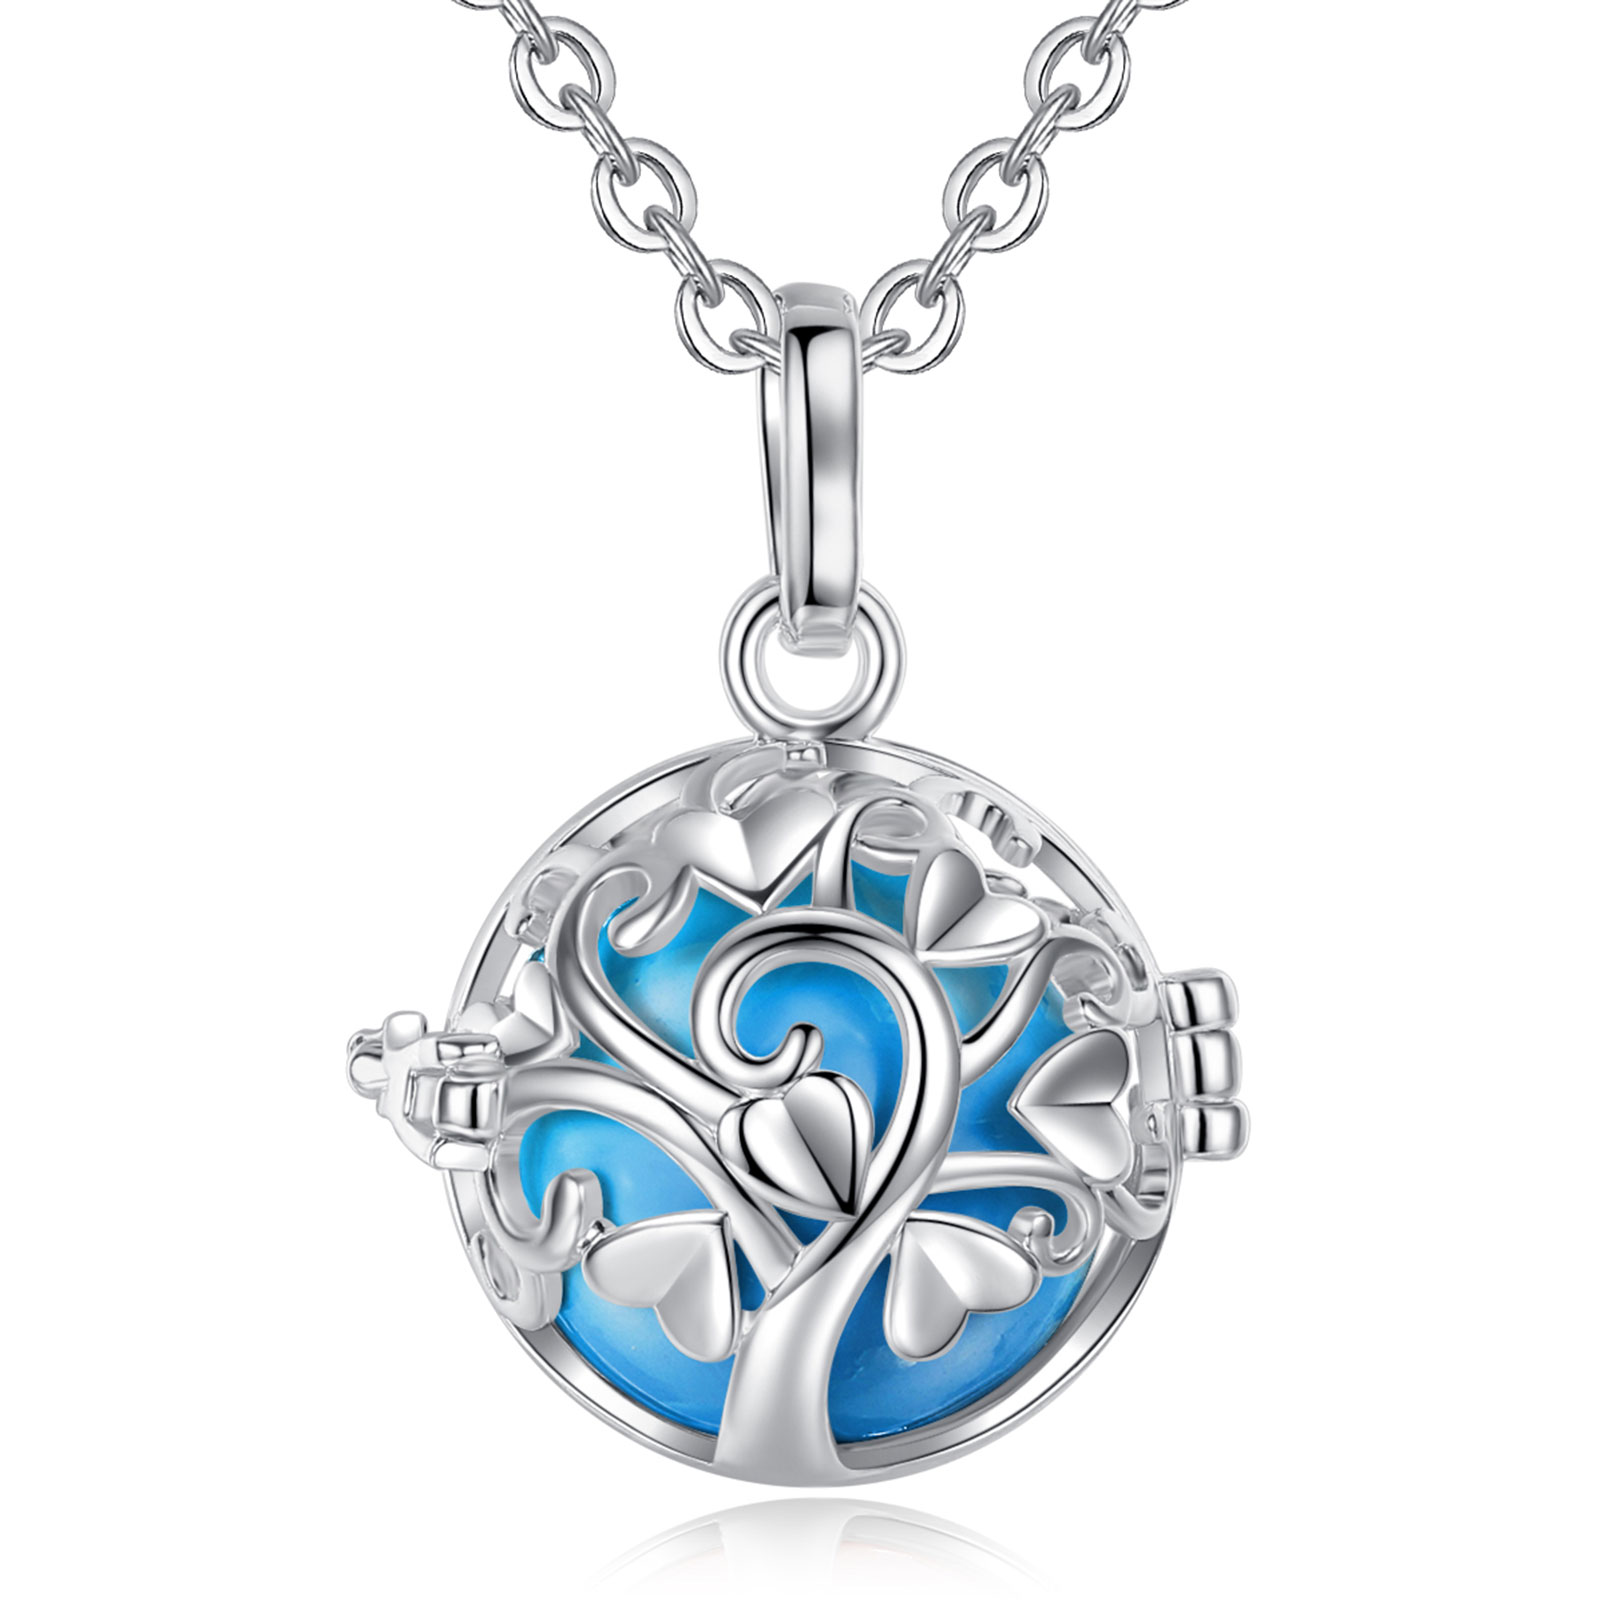 Merryshine Jewelry S925 Sterling Silver Tree of Life Harmony Chime Ball Pregnancy Necklace for Women